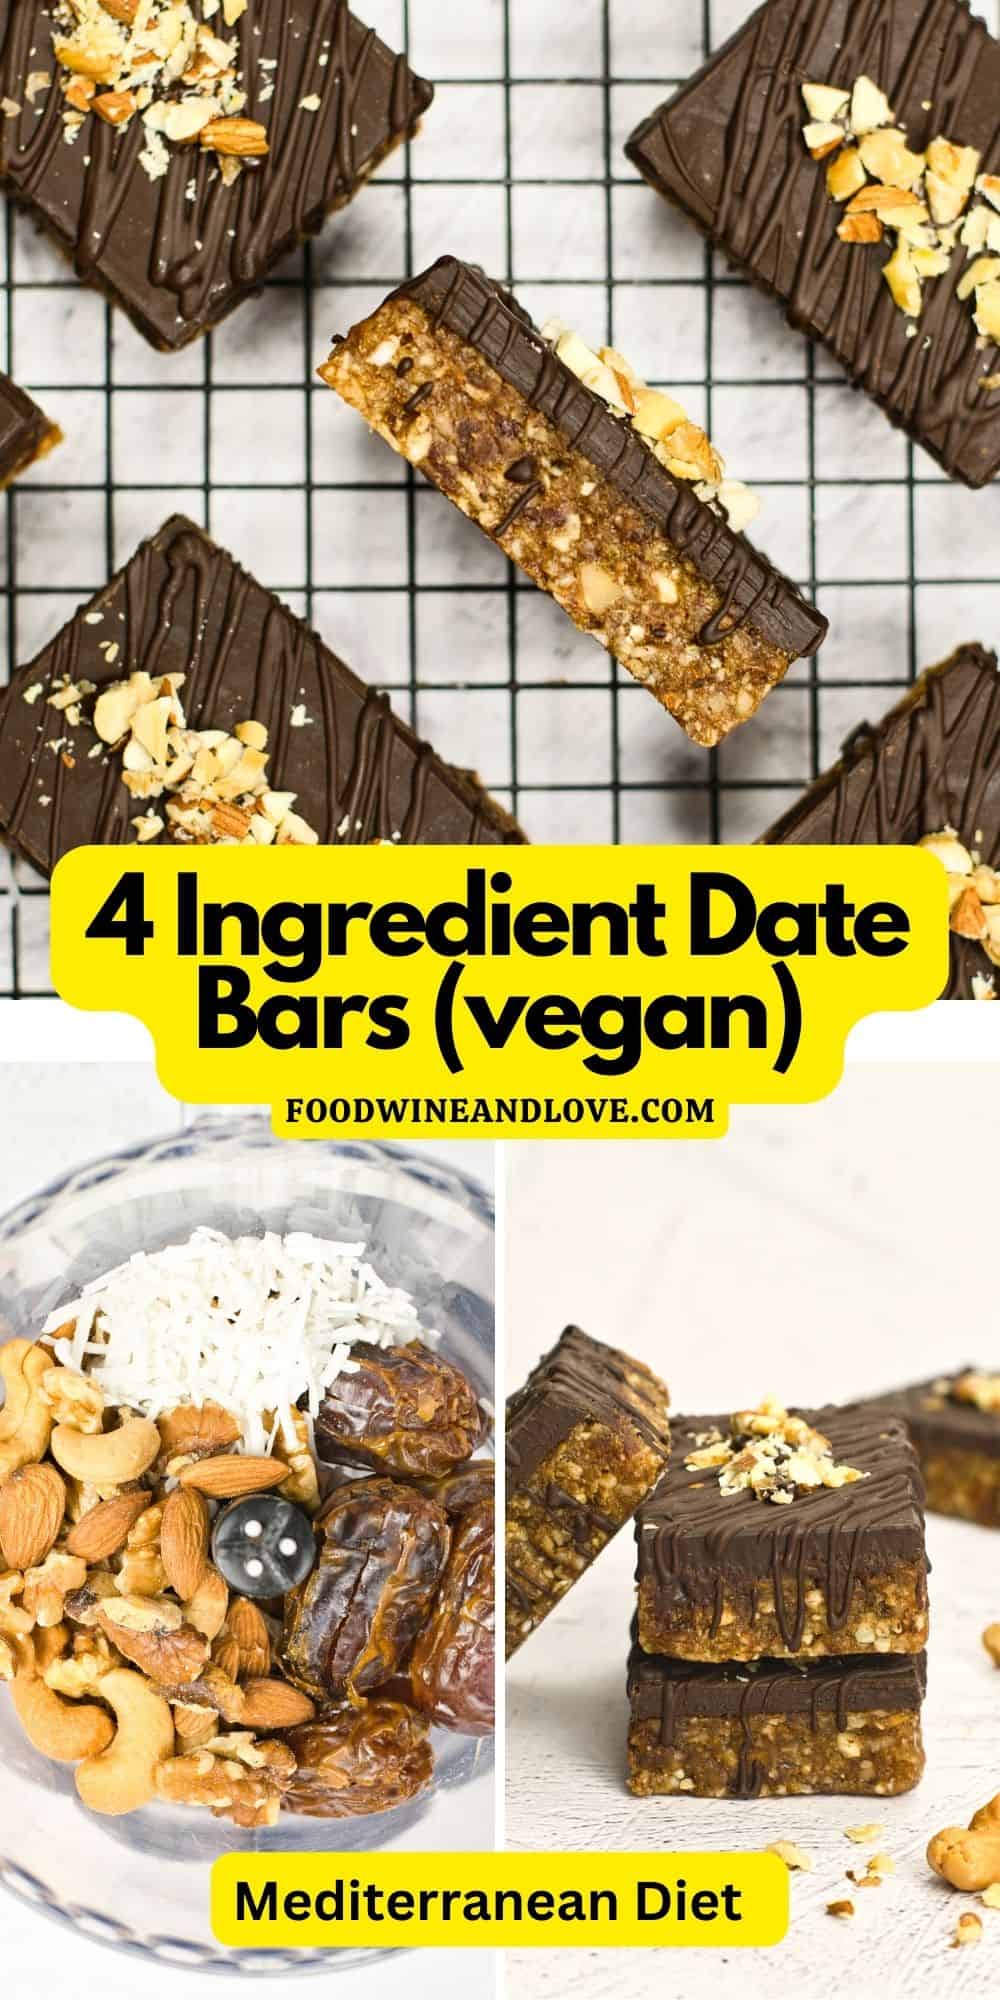 4 Ingredient Date Bars, a simple and delicious vegan dessert or snack recipe made with healthy natural ingredients.